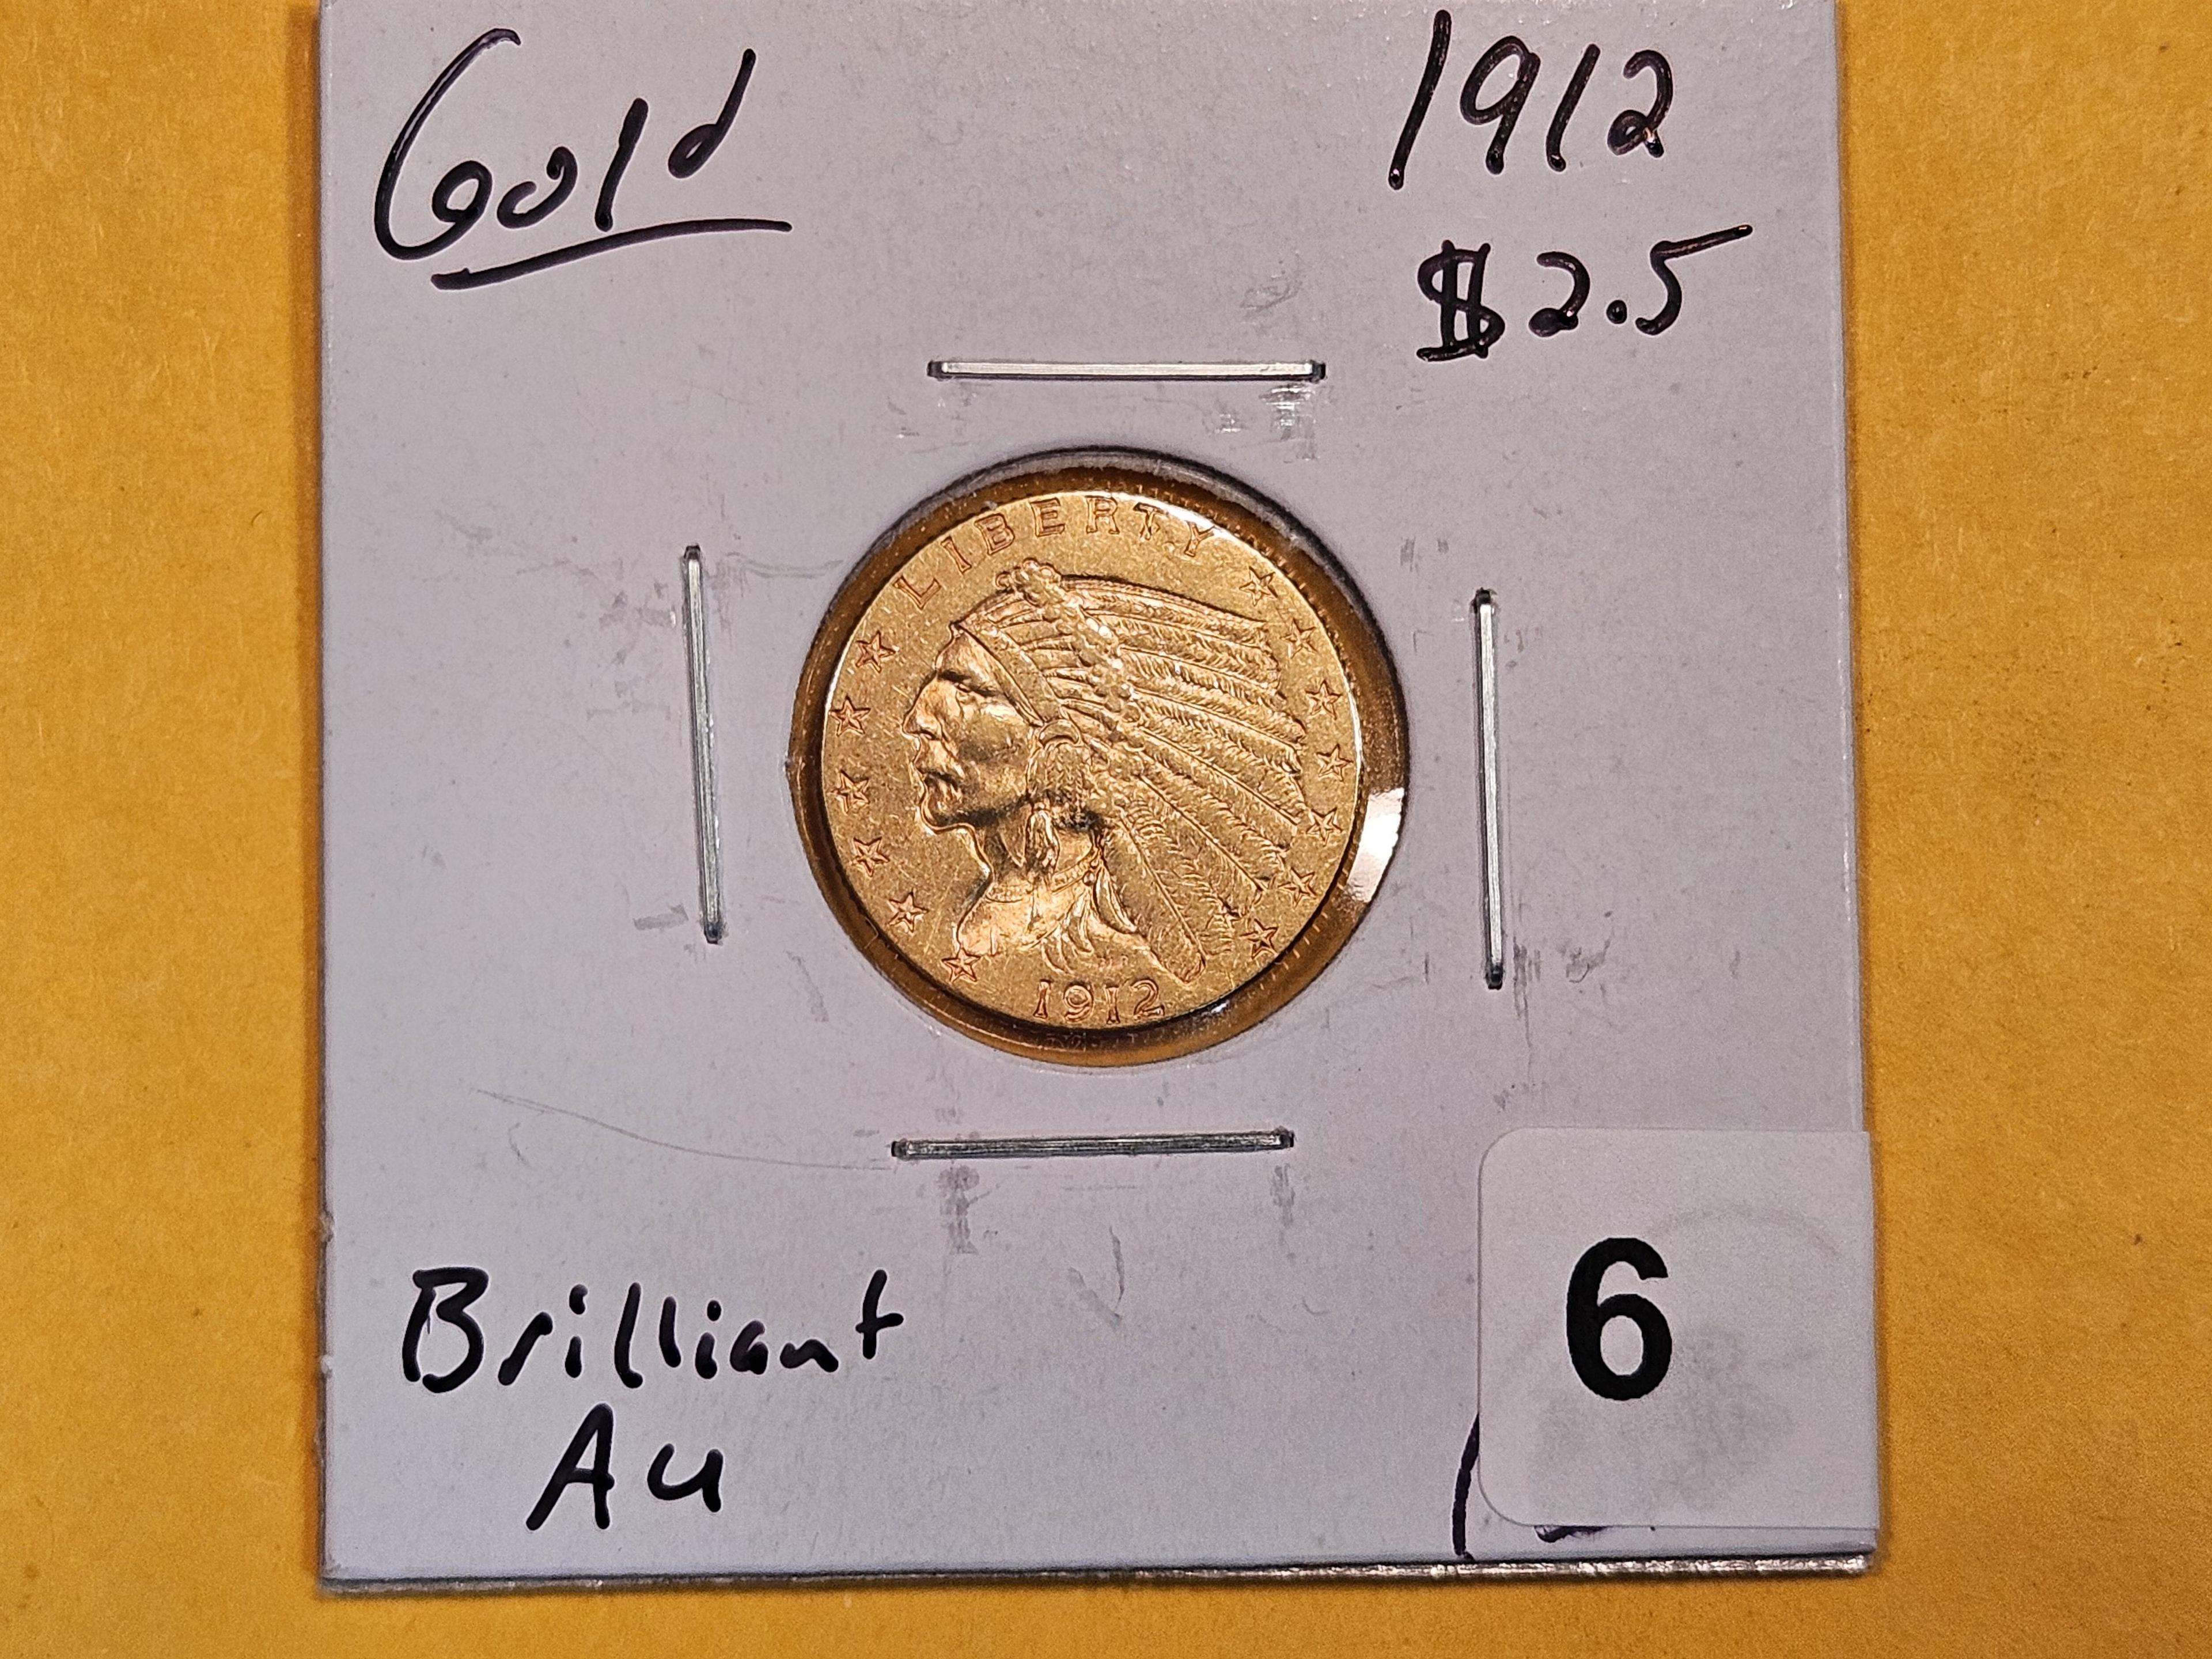 GOLD! Brilliant About Uncirculated 1912 Gold $2.5 Dollars